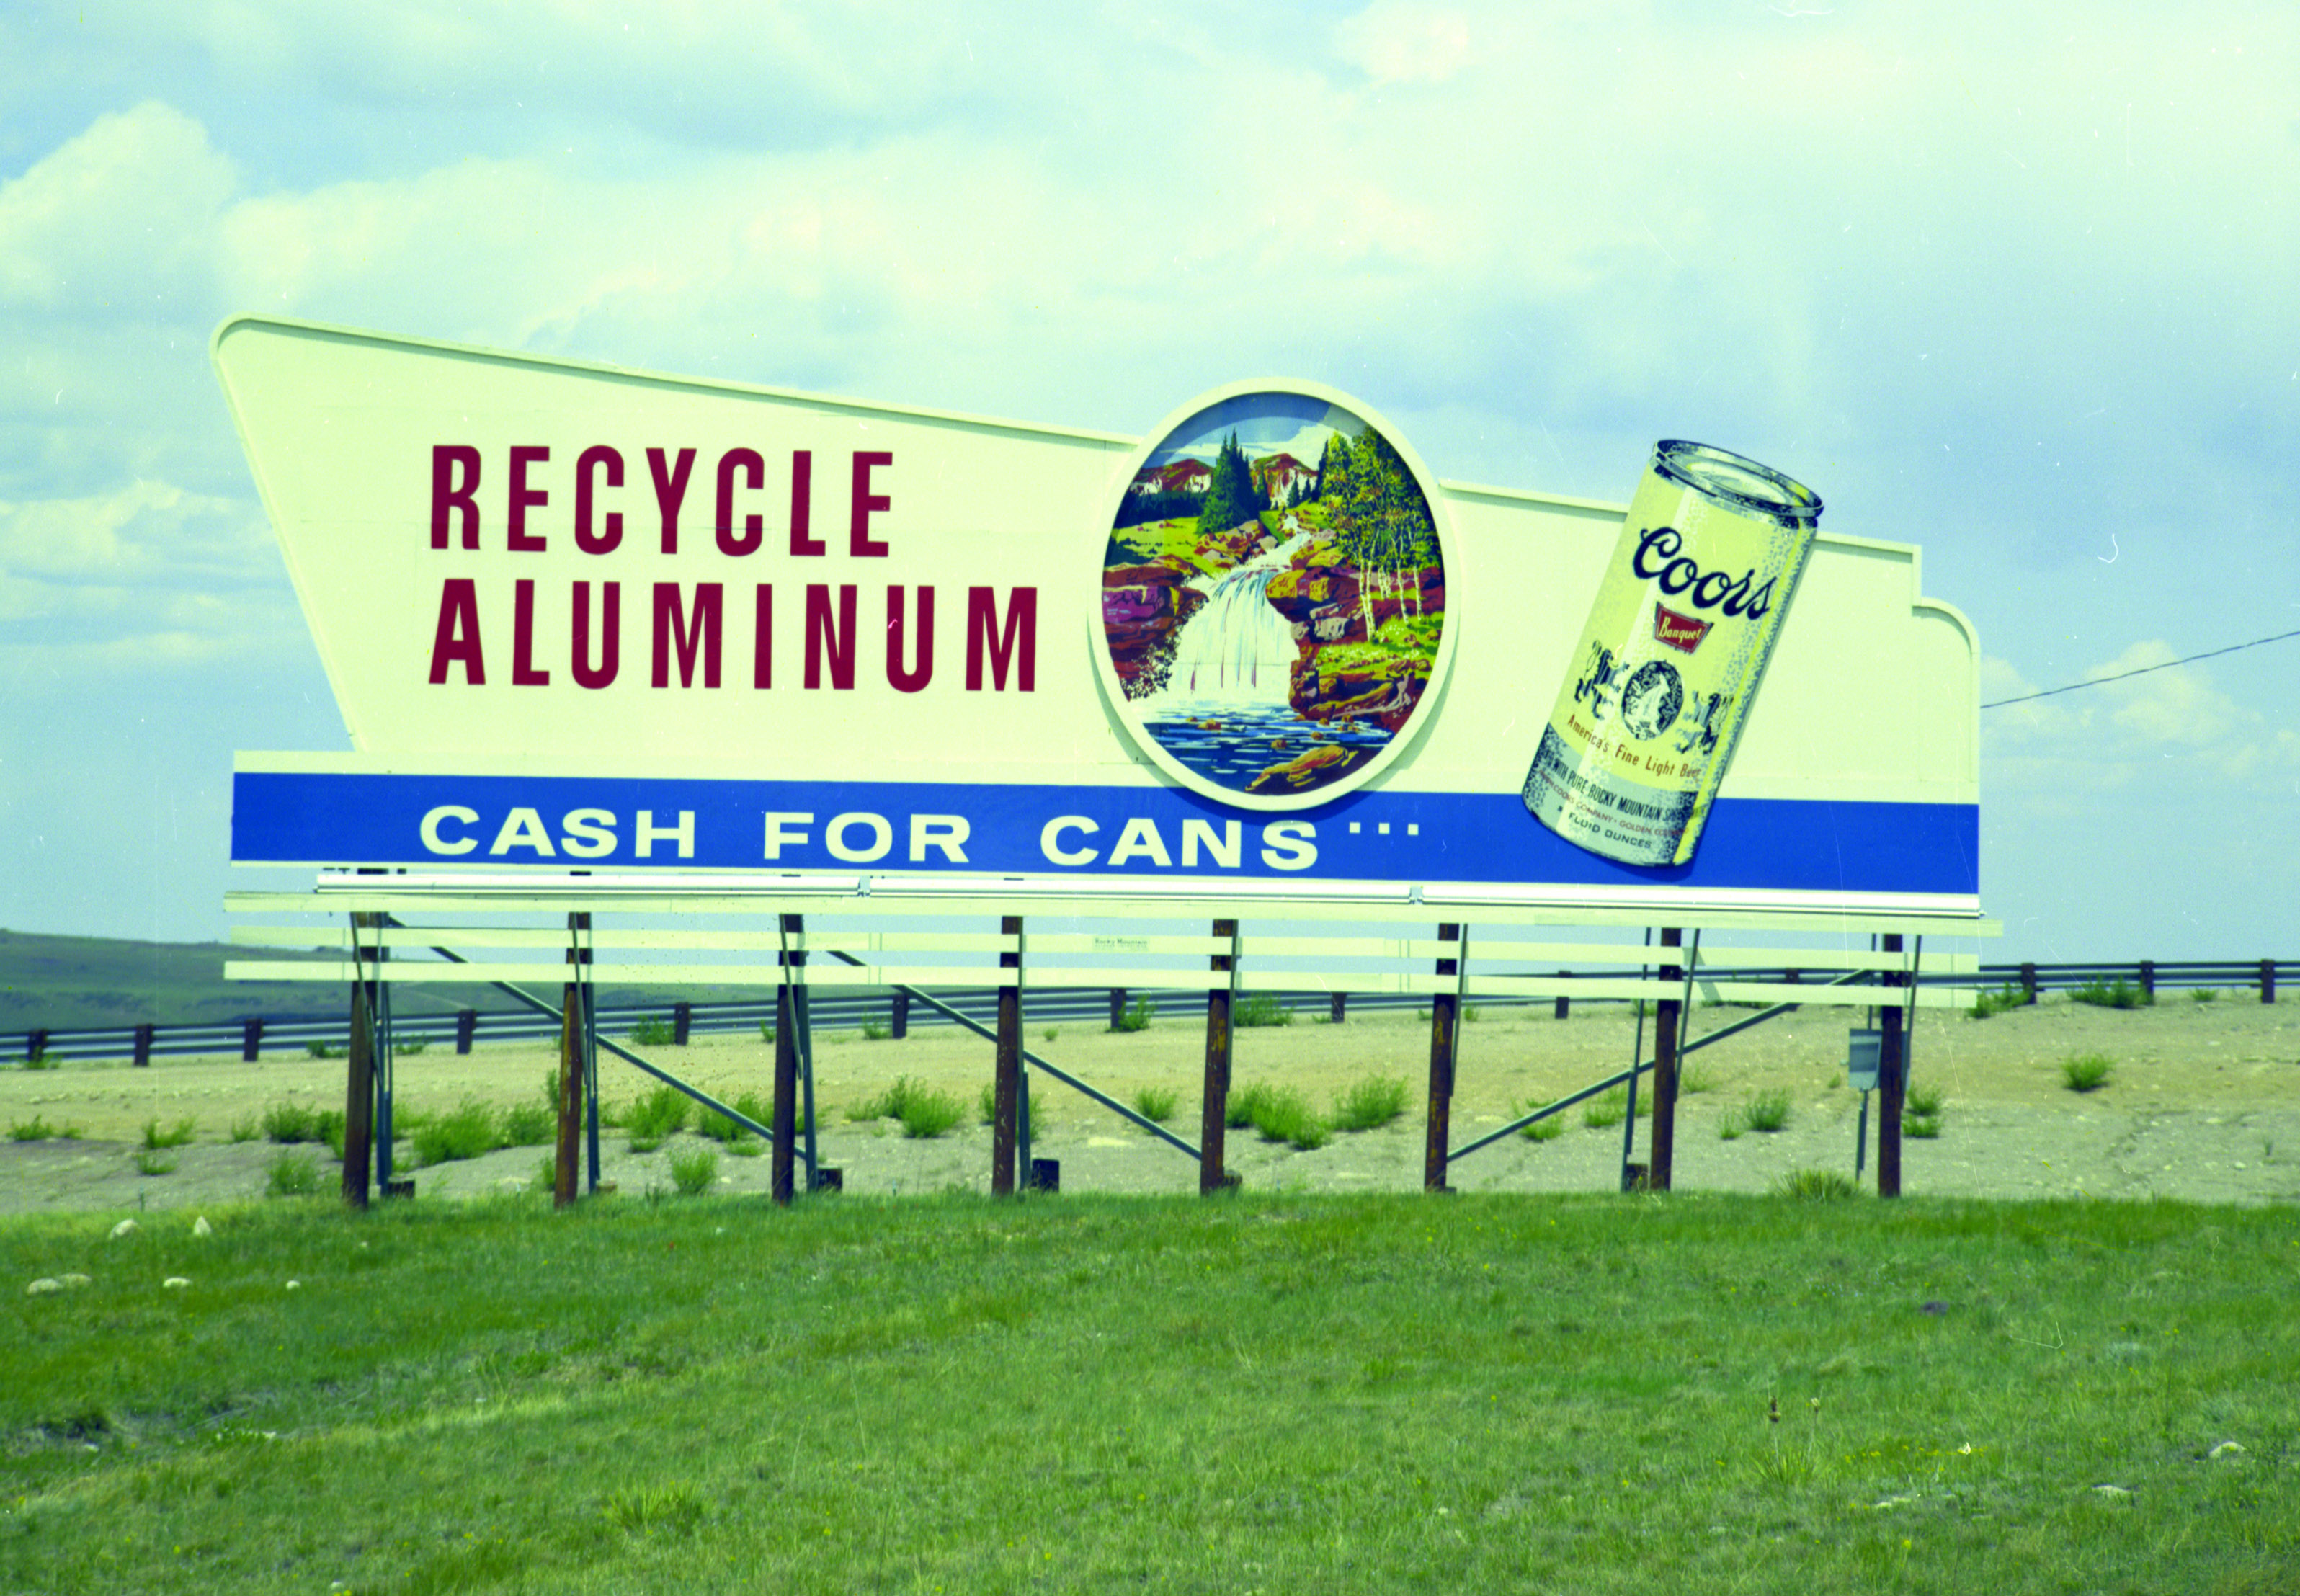 A billboard ad reading: "Recycle Aluminum. Cash for Cans. Coor's."